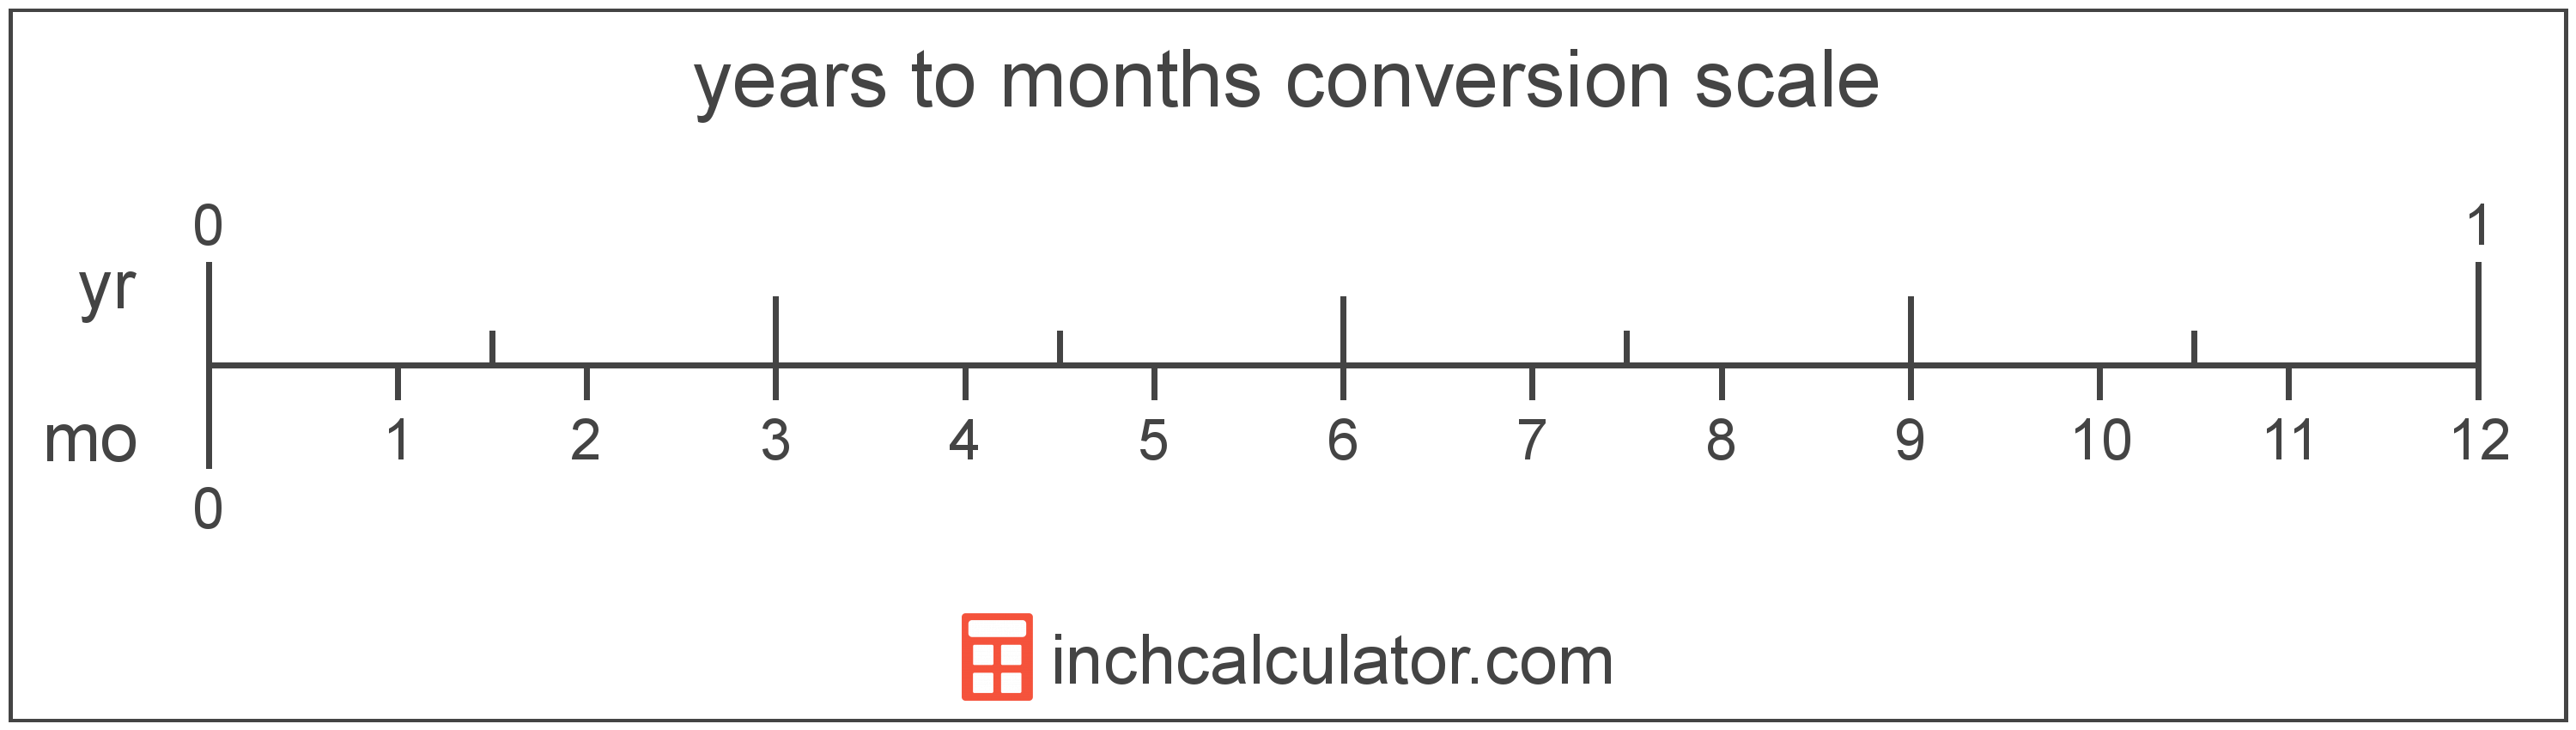 conversion scale showing months and equivalent years time values